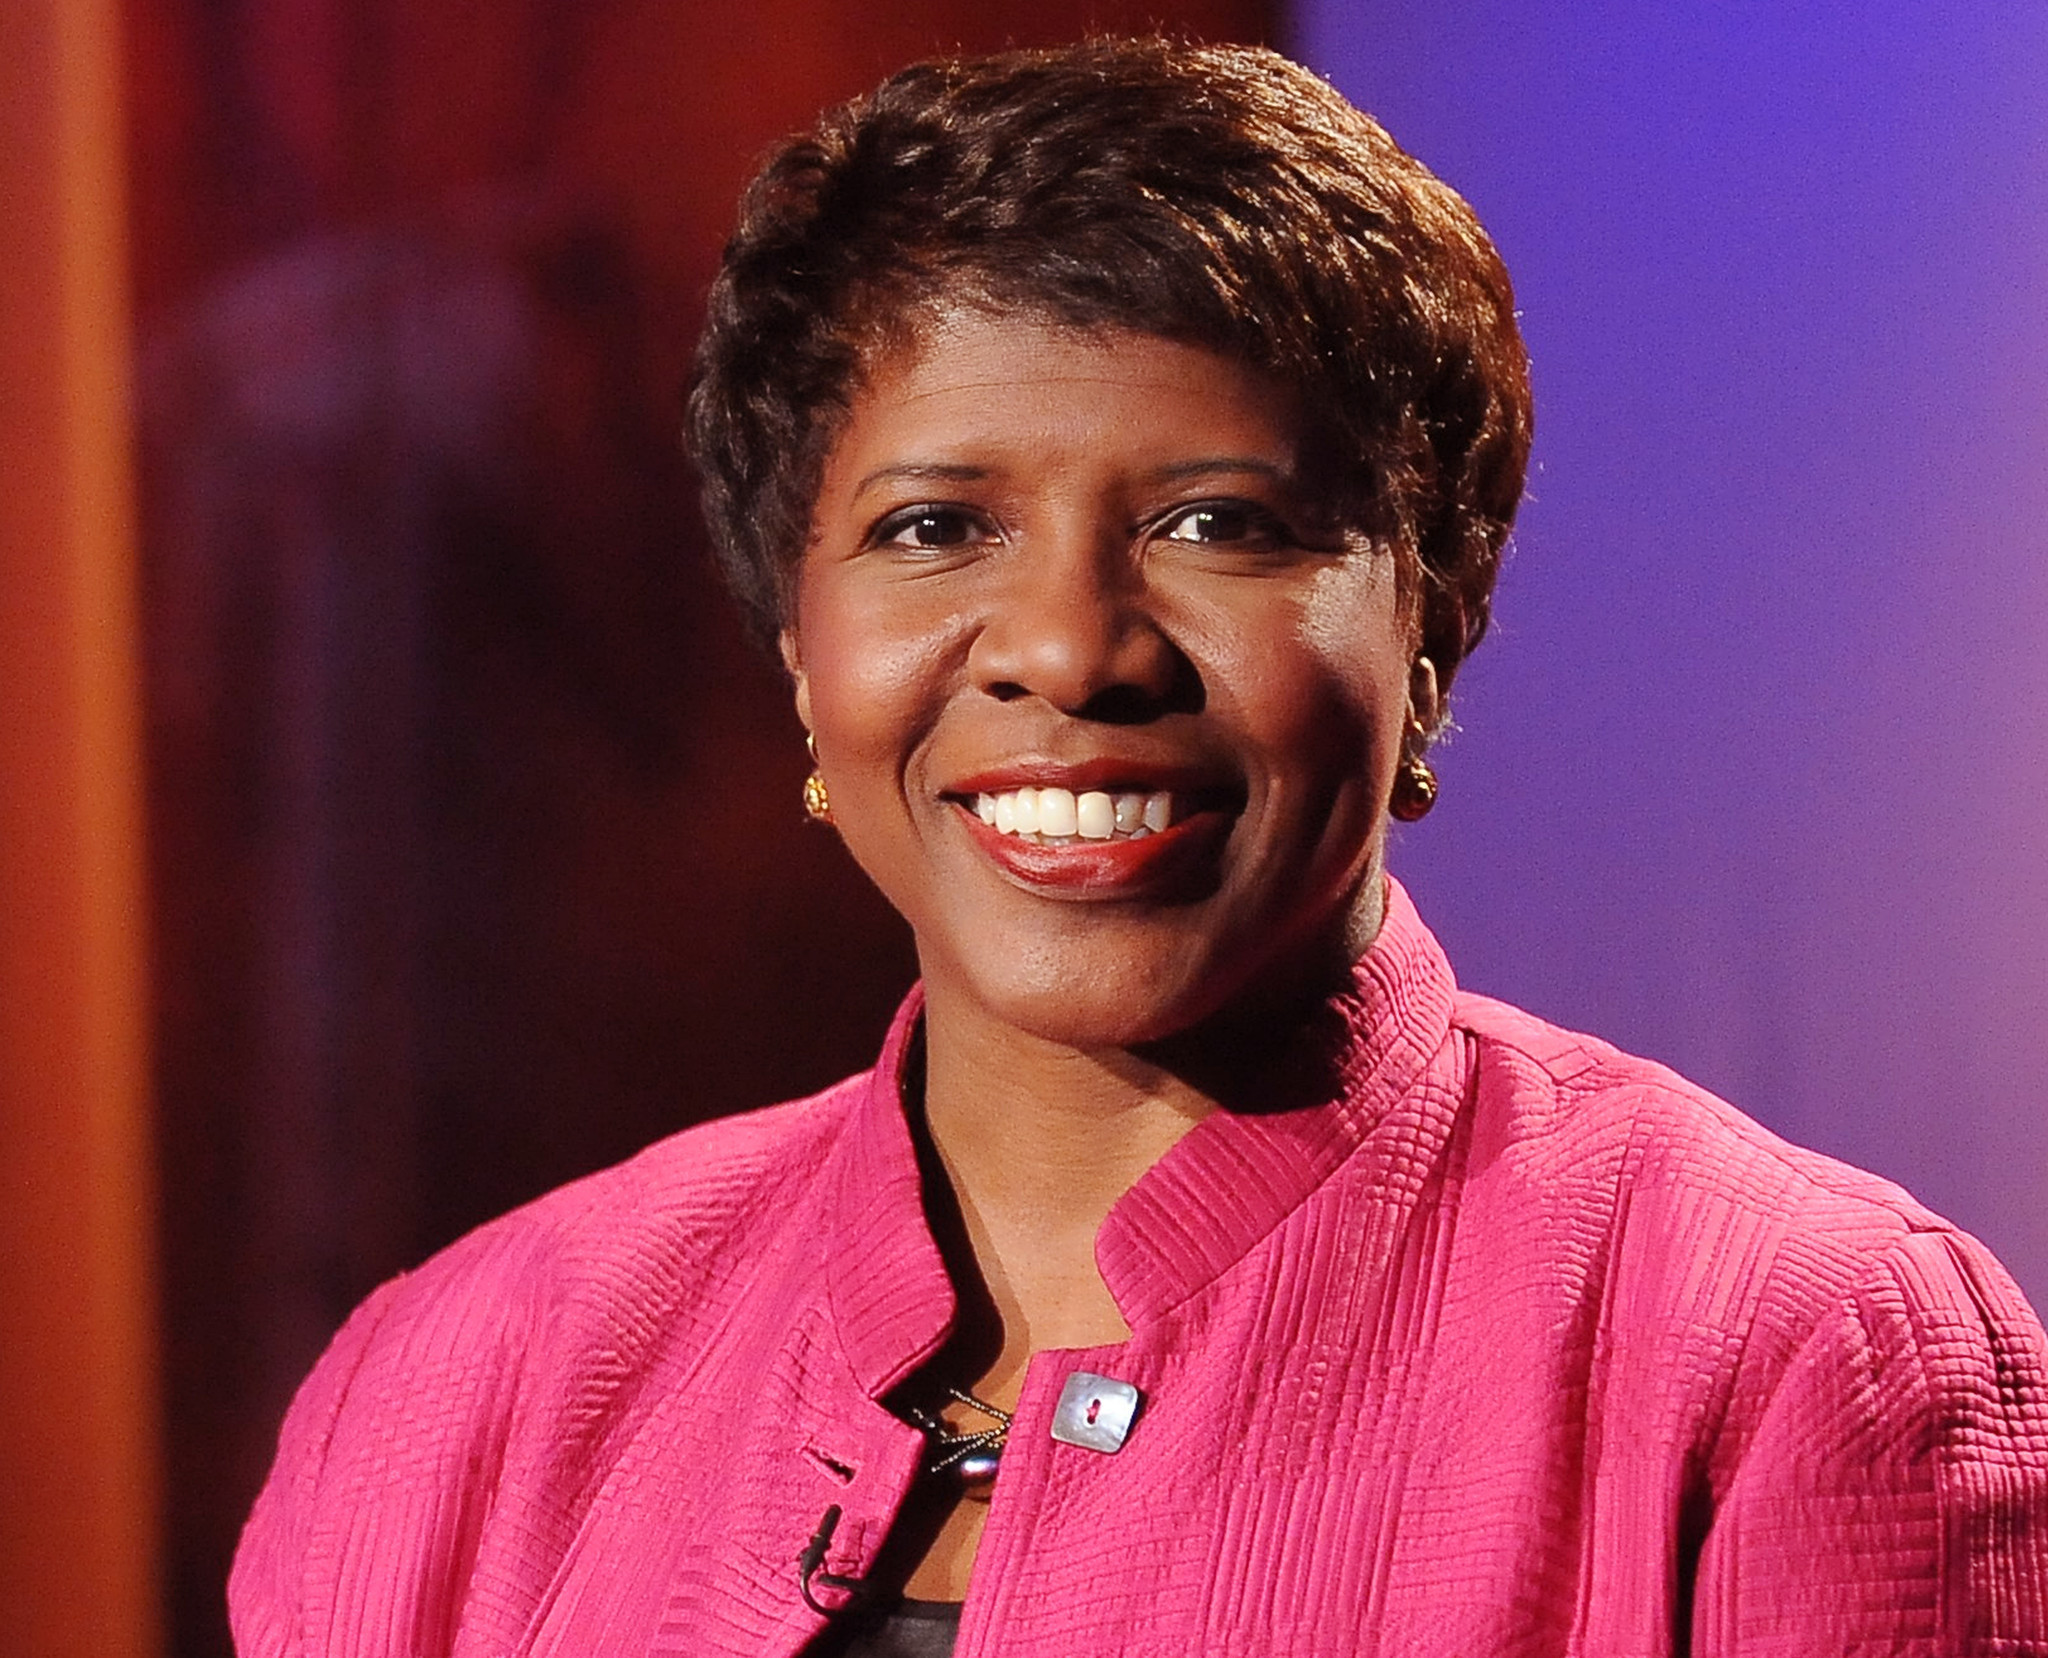 Gwen Ifill, pioneering broadcaster, PBS host, dies at 61 - Daily Press